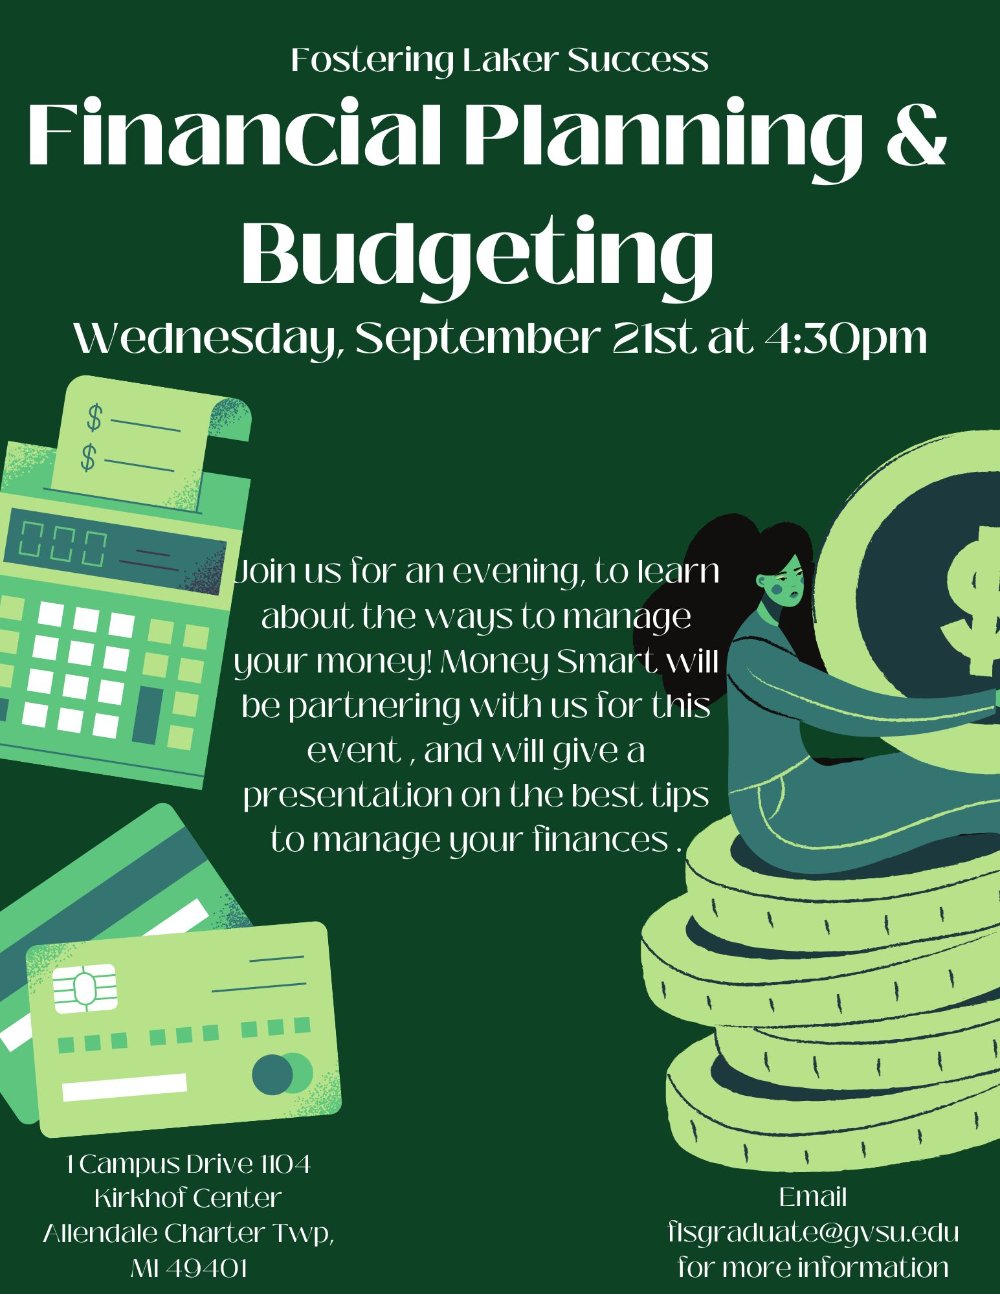 Financial Planning and Budgeting event